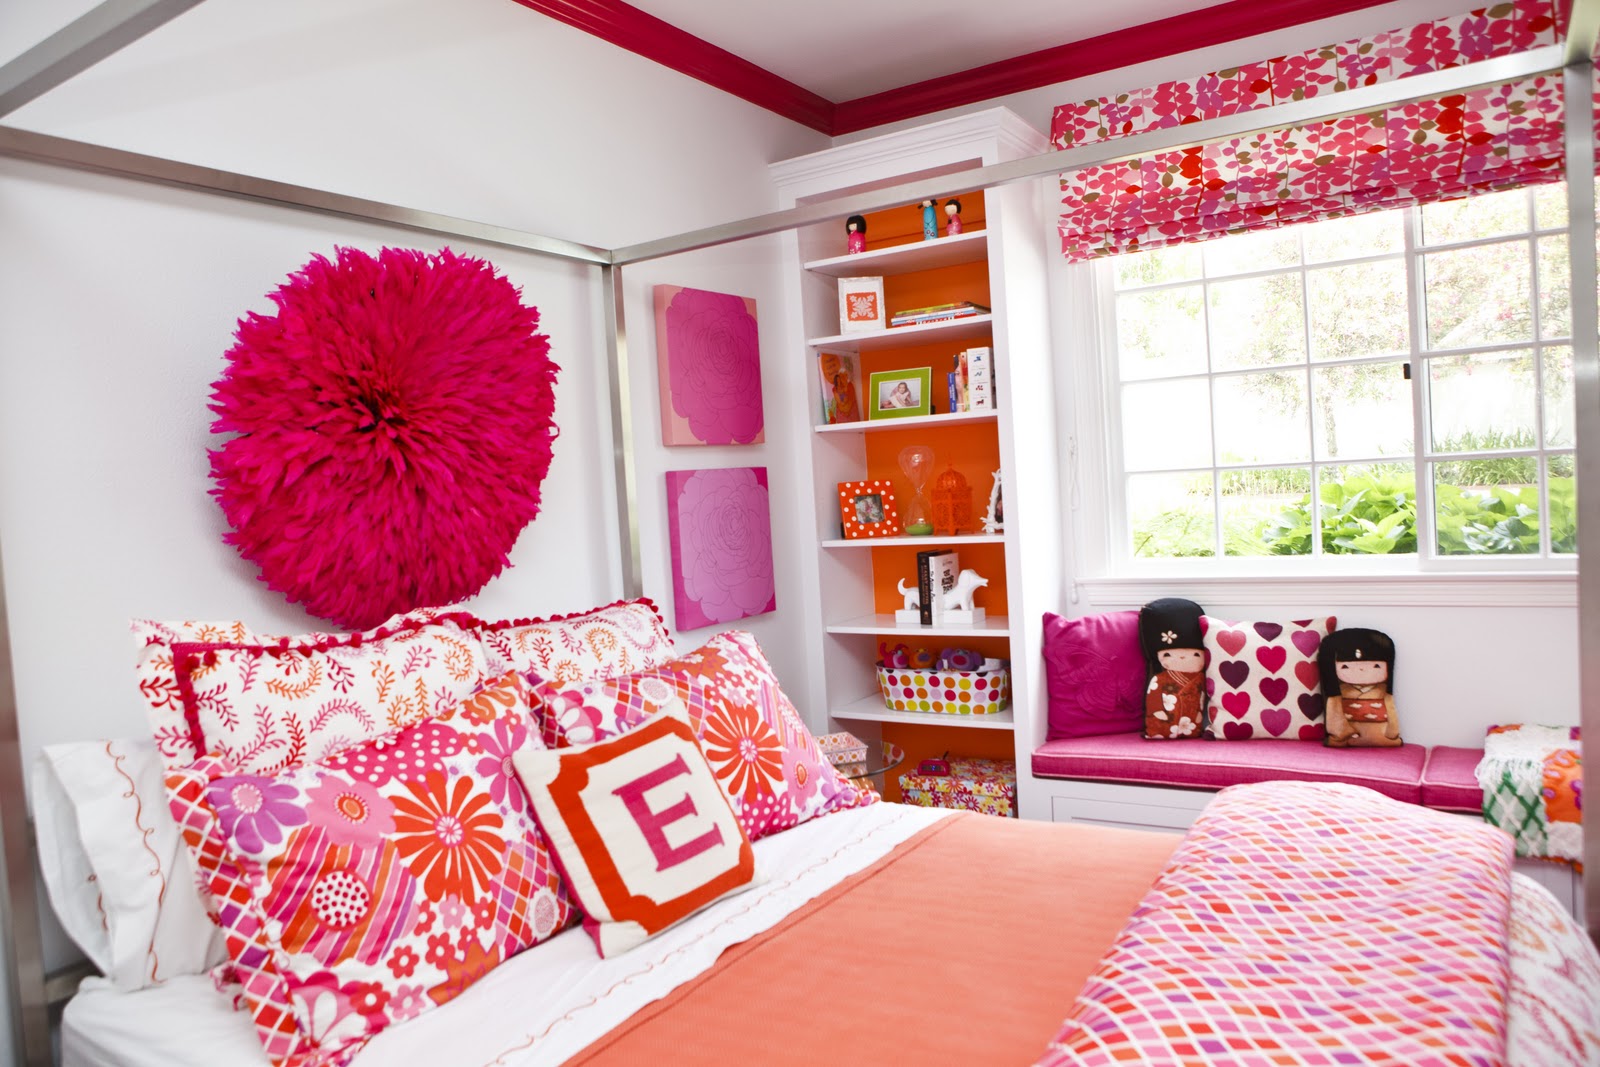 Decorating Ideas For Small Children's Bedrooms